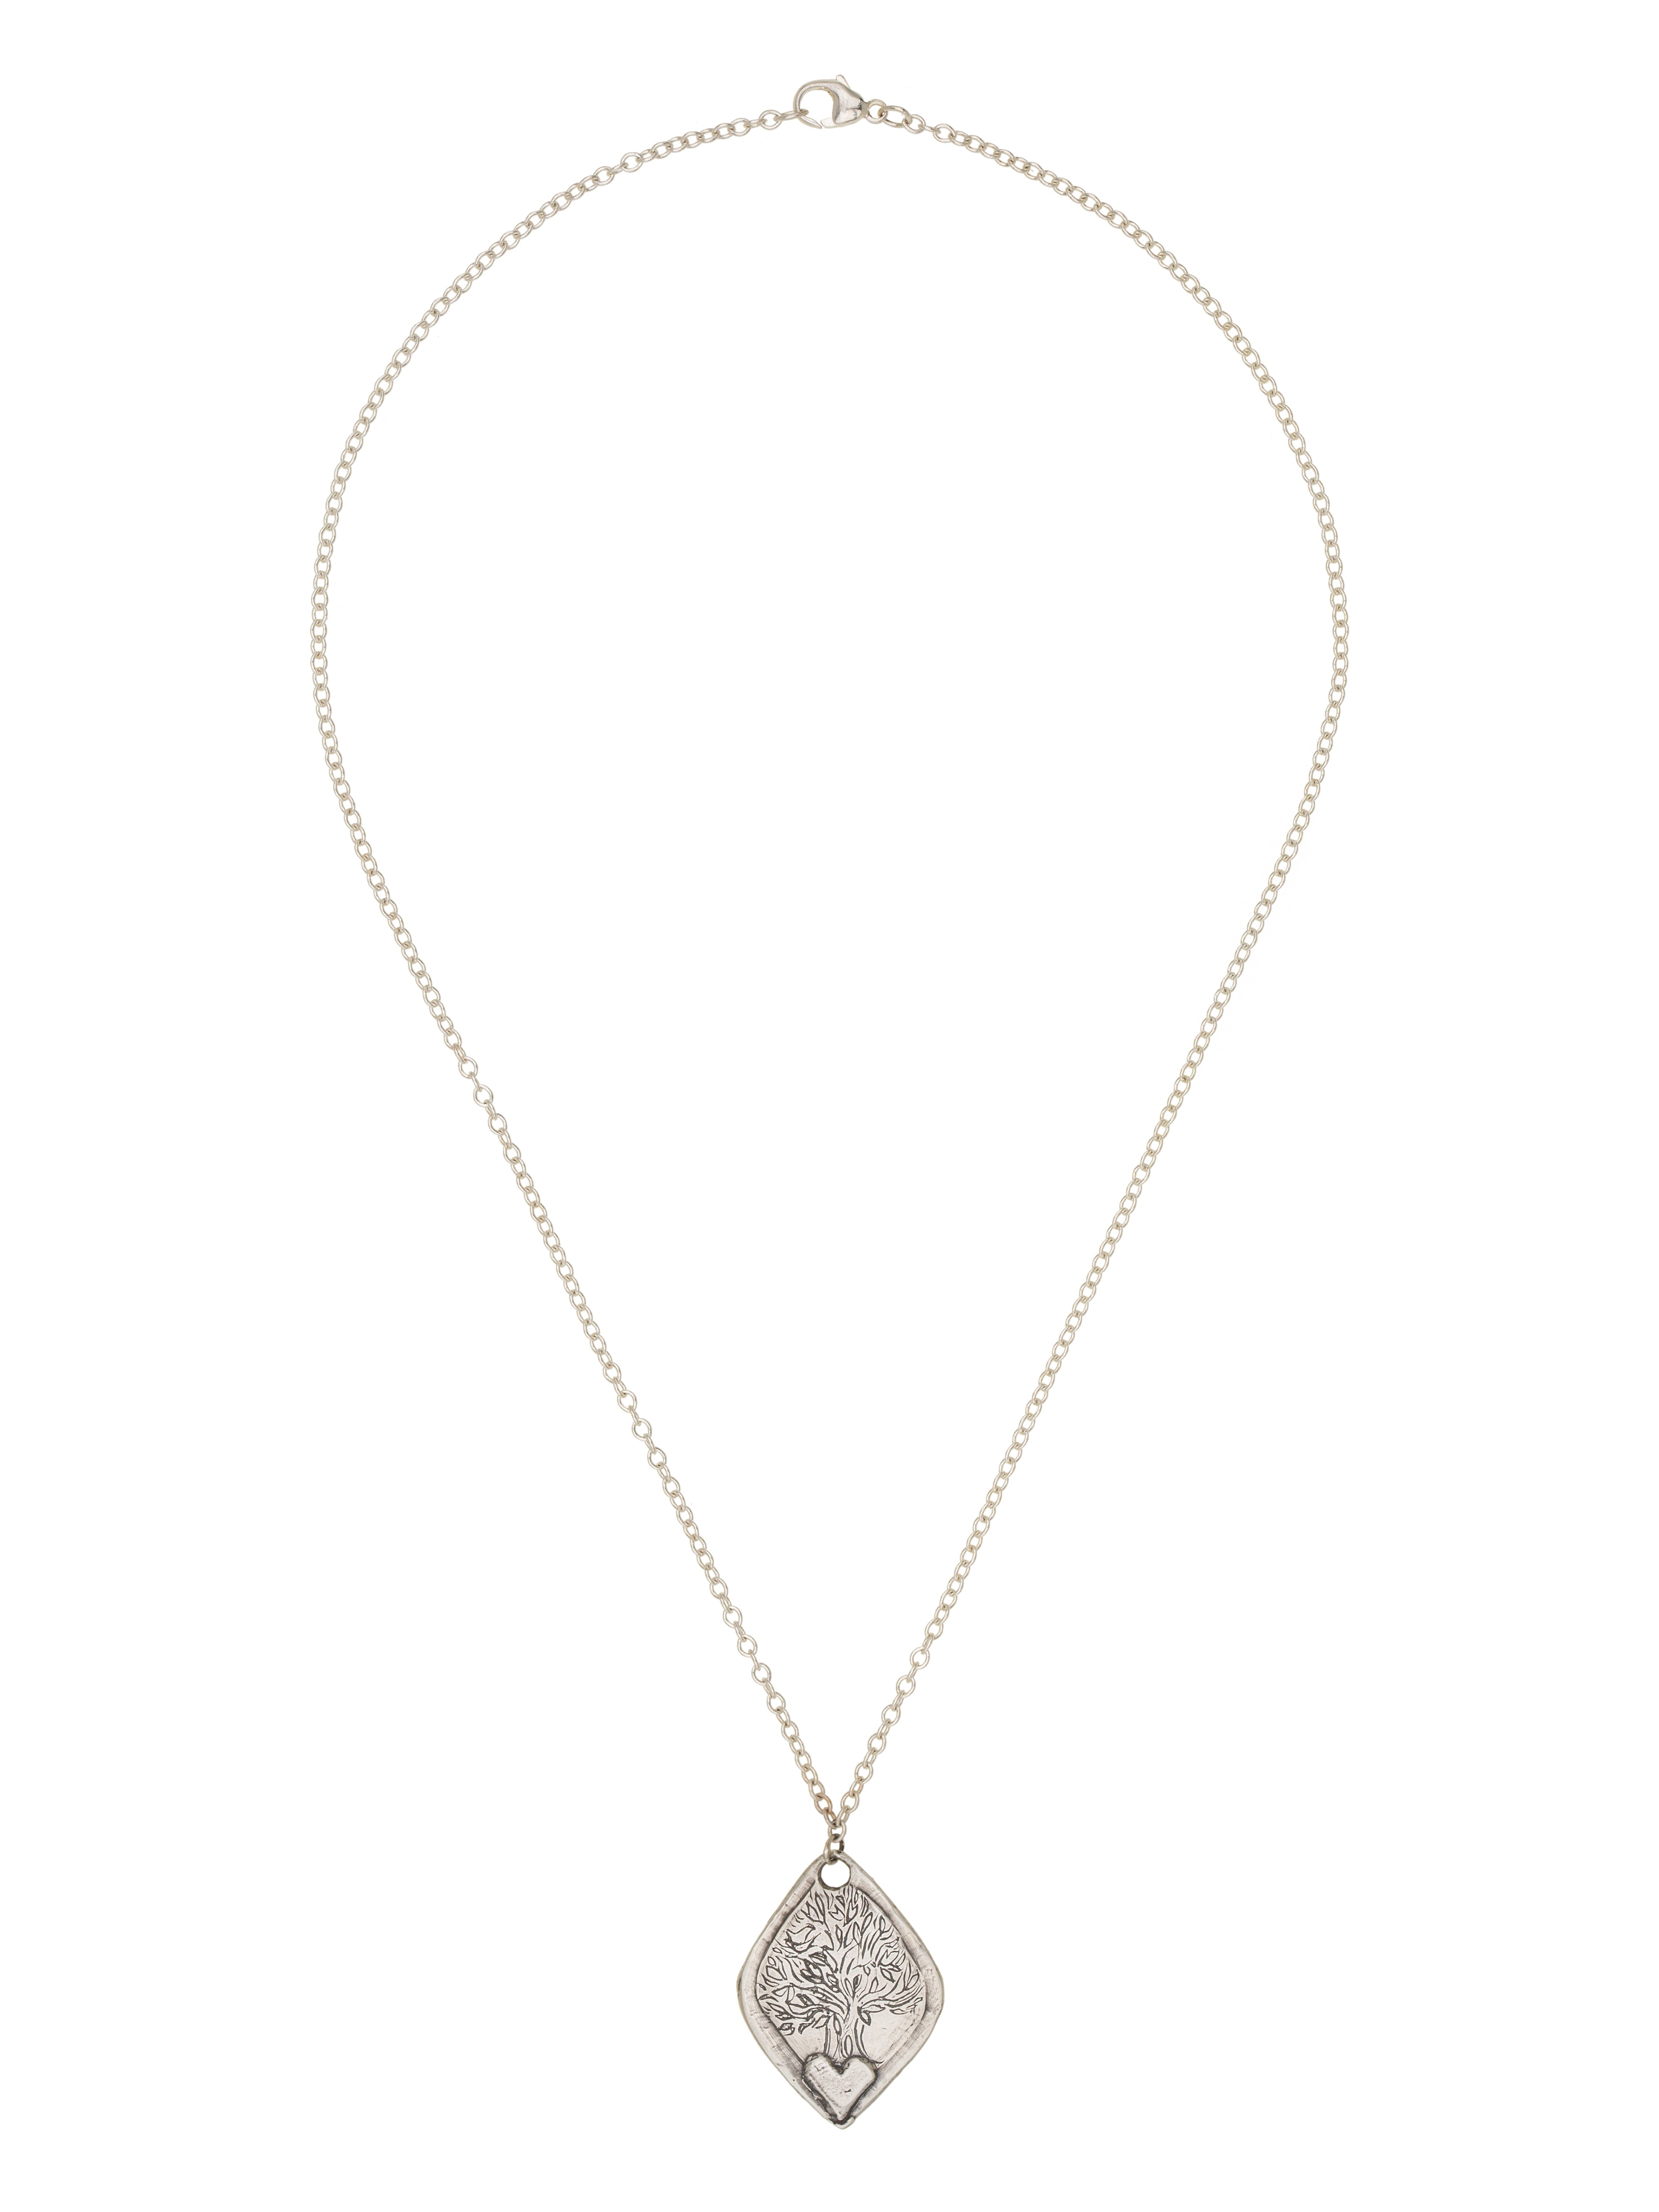 Grounded in Love Necklace